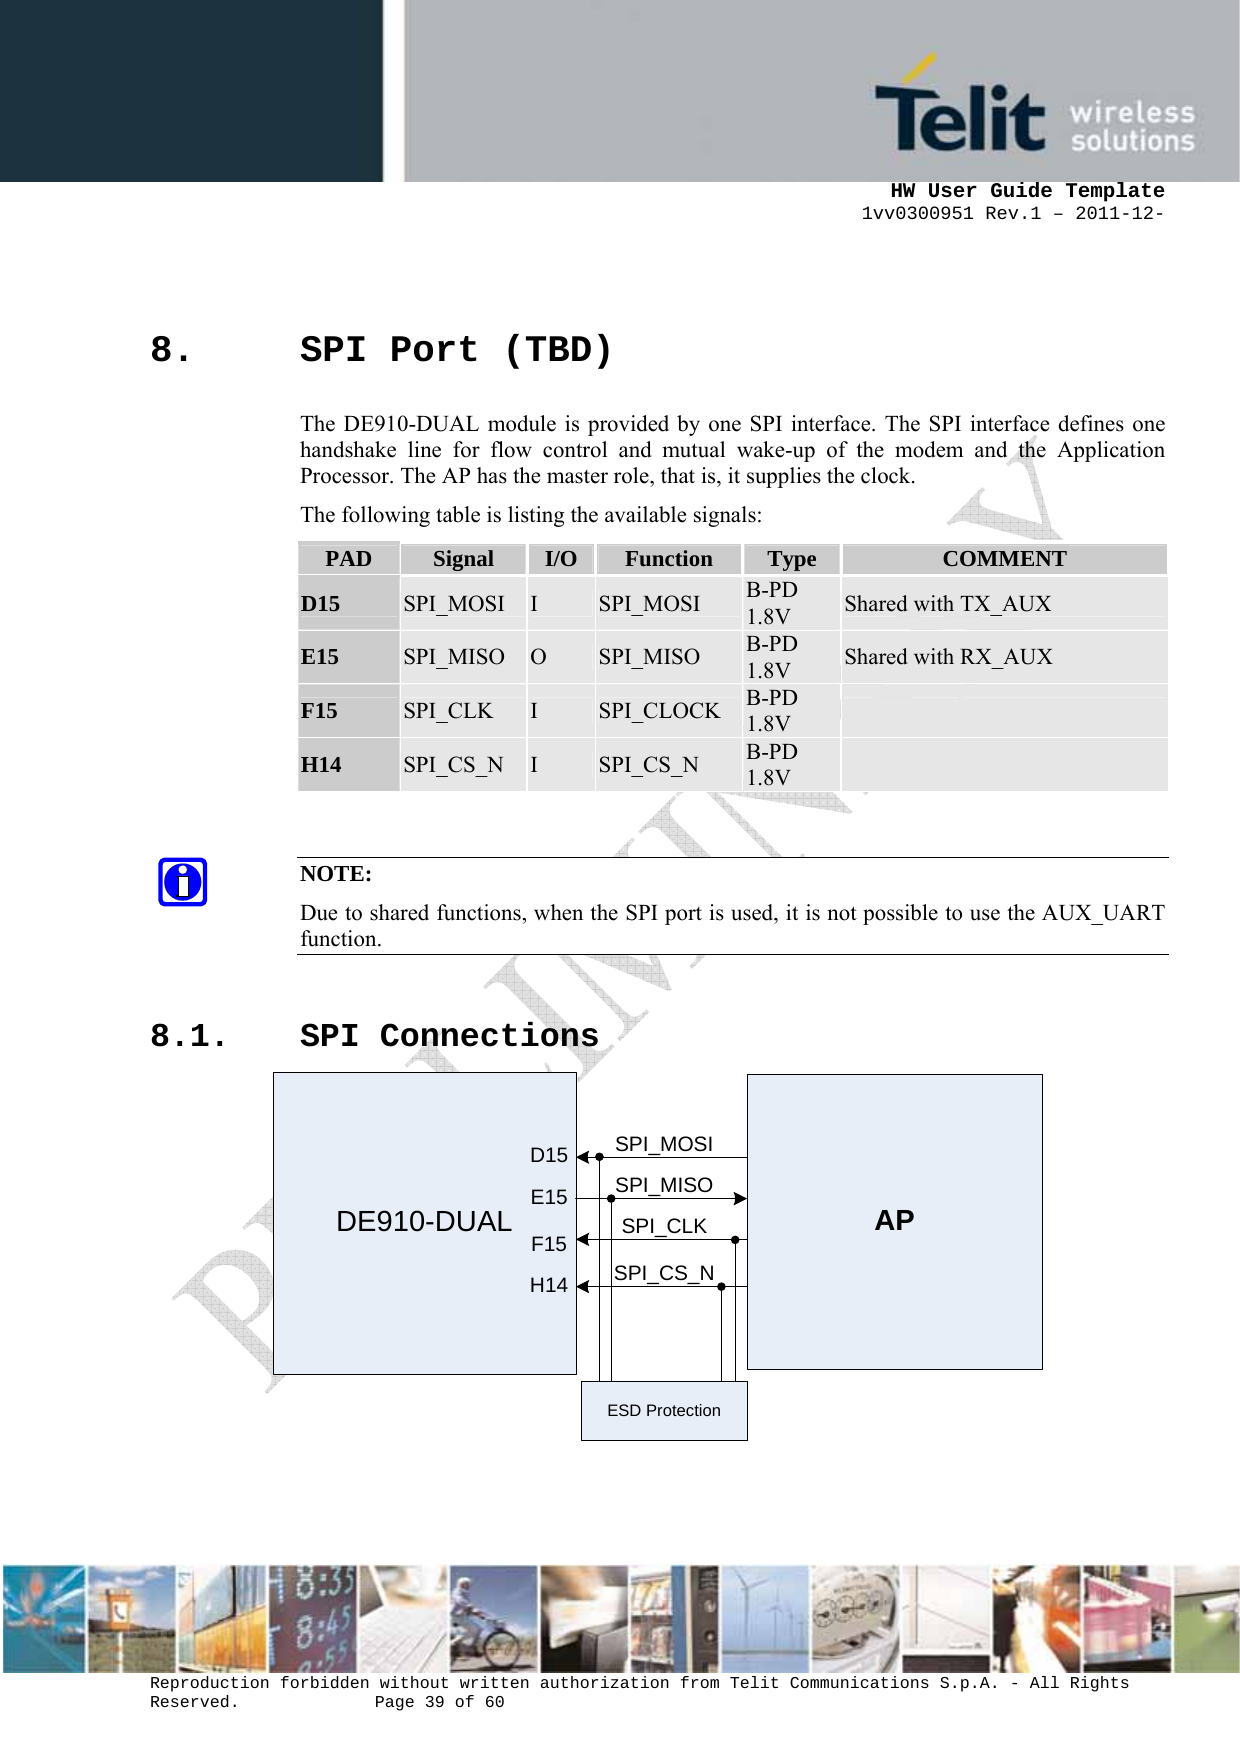      HW User Guide Template 1vv0300951 Rev.1 – 2011-12-  Reproduction forbidden without written authorization from Telit Communications S.p.A. - All Rights Reserved.    Page 39 of 60                                                     8. SPI Port (TBD) The DE910-DUAL module is provided by one SPI interface. The SPI interface defines one handshake line for flow control and mutual wake-up of the modem and the Application Processor. The AP has the master role, that is, it supplies the clock.  The following table is listing the available signals: PAD  Signal  I/O Function  Type  COMMENT D15  SPI_MOSI  I  SPI_MOSI  B-PD 1.8V  Shared with TX_AUX E15  SPI_MISO  O  SPI_MISO  B-PD 1.8V  Shared with RX_AUX F15  SPI_CLK  I  SPI_CLOCK  B-PD 1.8V   H14  SPI_CS_N  I  SPI_CS_N  B-PD 1.8V     NOTE: Due to shared functions, when the SPI port is used, it is not possible to use the AUX_UART function.  8.1. SPI Connections DE910-DUAL APD15E15F15H14SPI_MOSISPI_MISOSPI_CLKSPI_CS_NESD Protection     